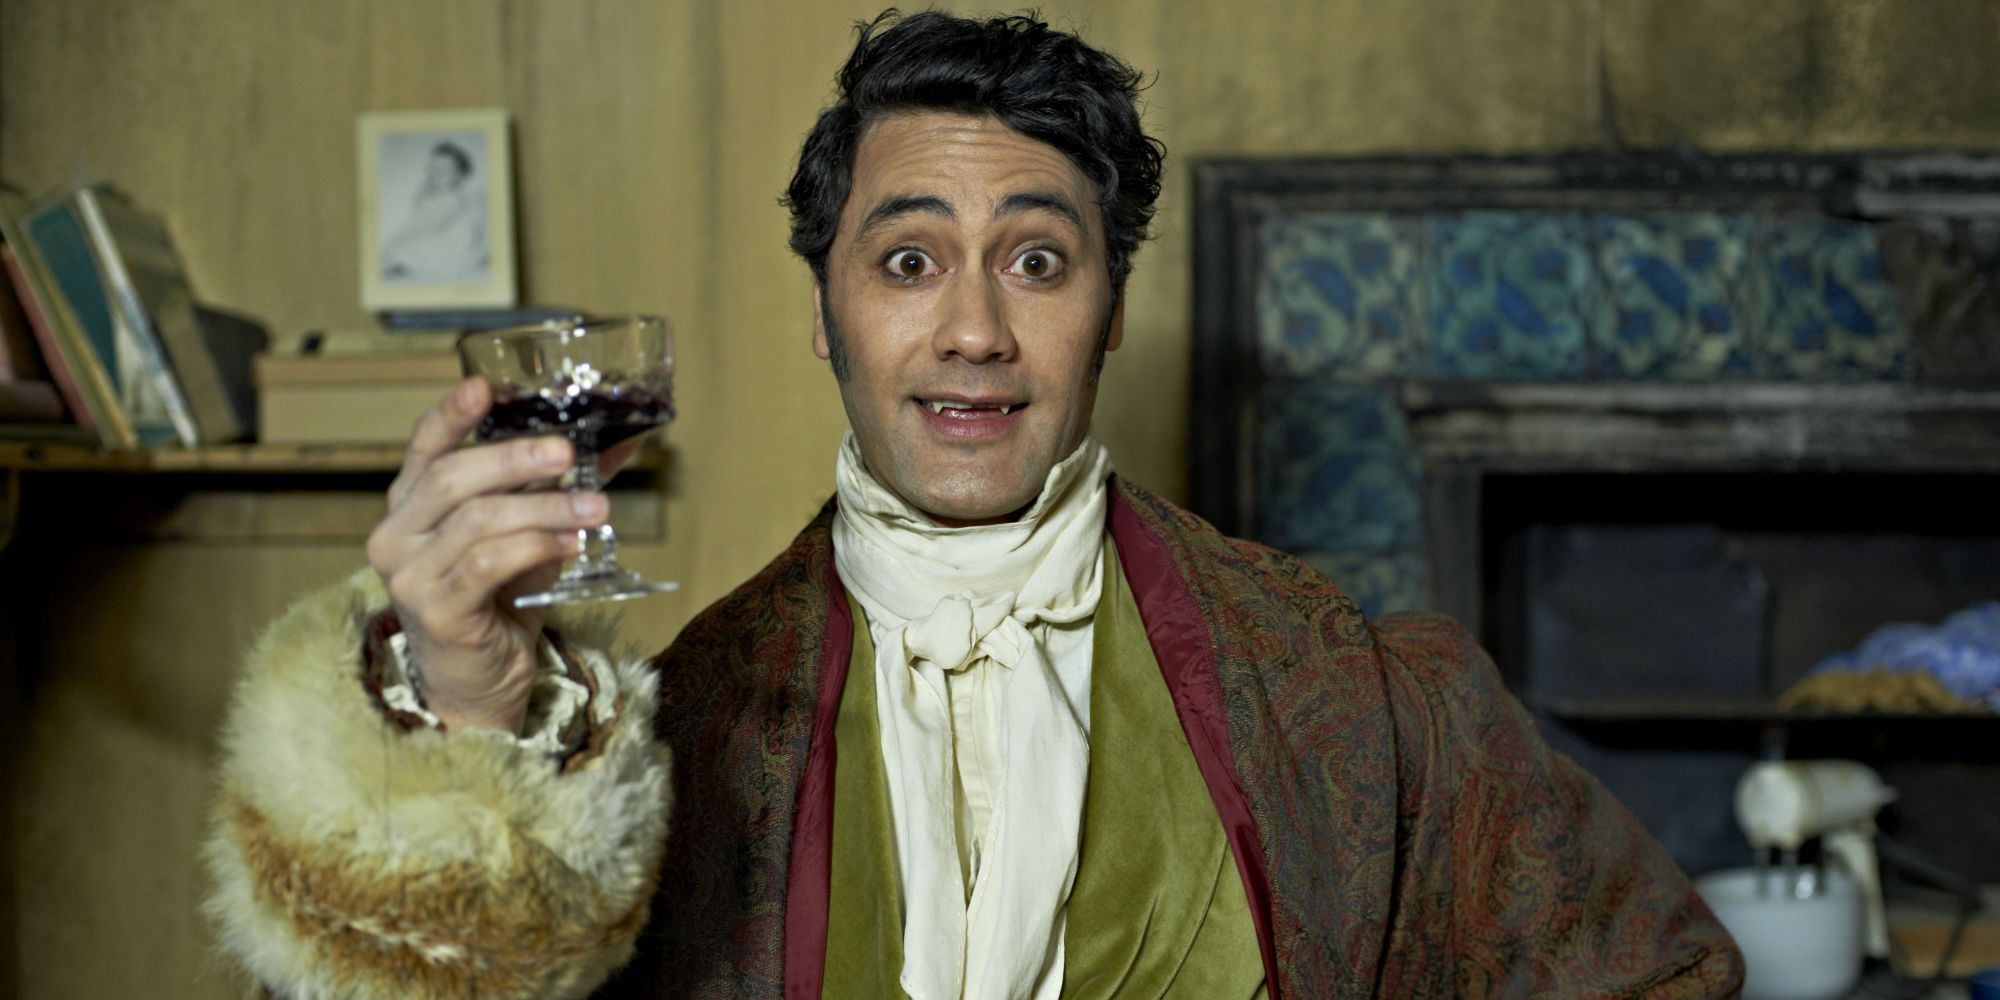 Taika Waititi with vampire teeth holding up a glass in What We Do in the Shadows